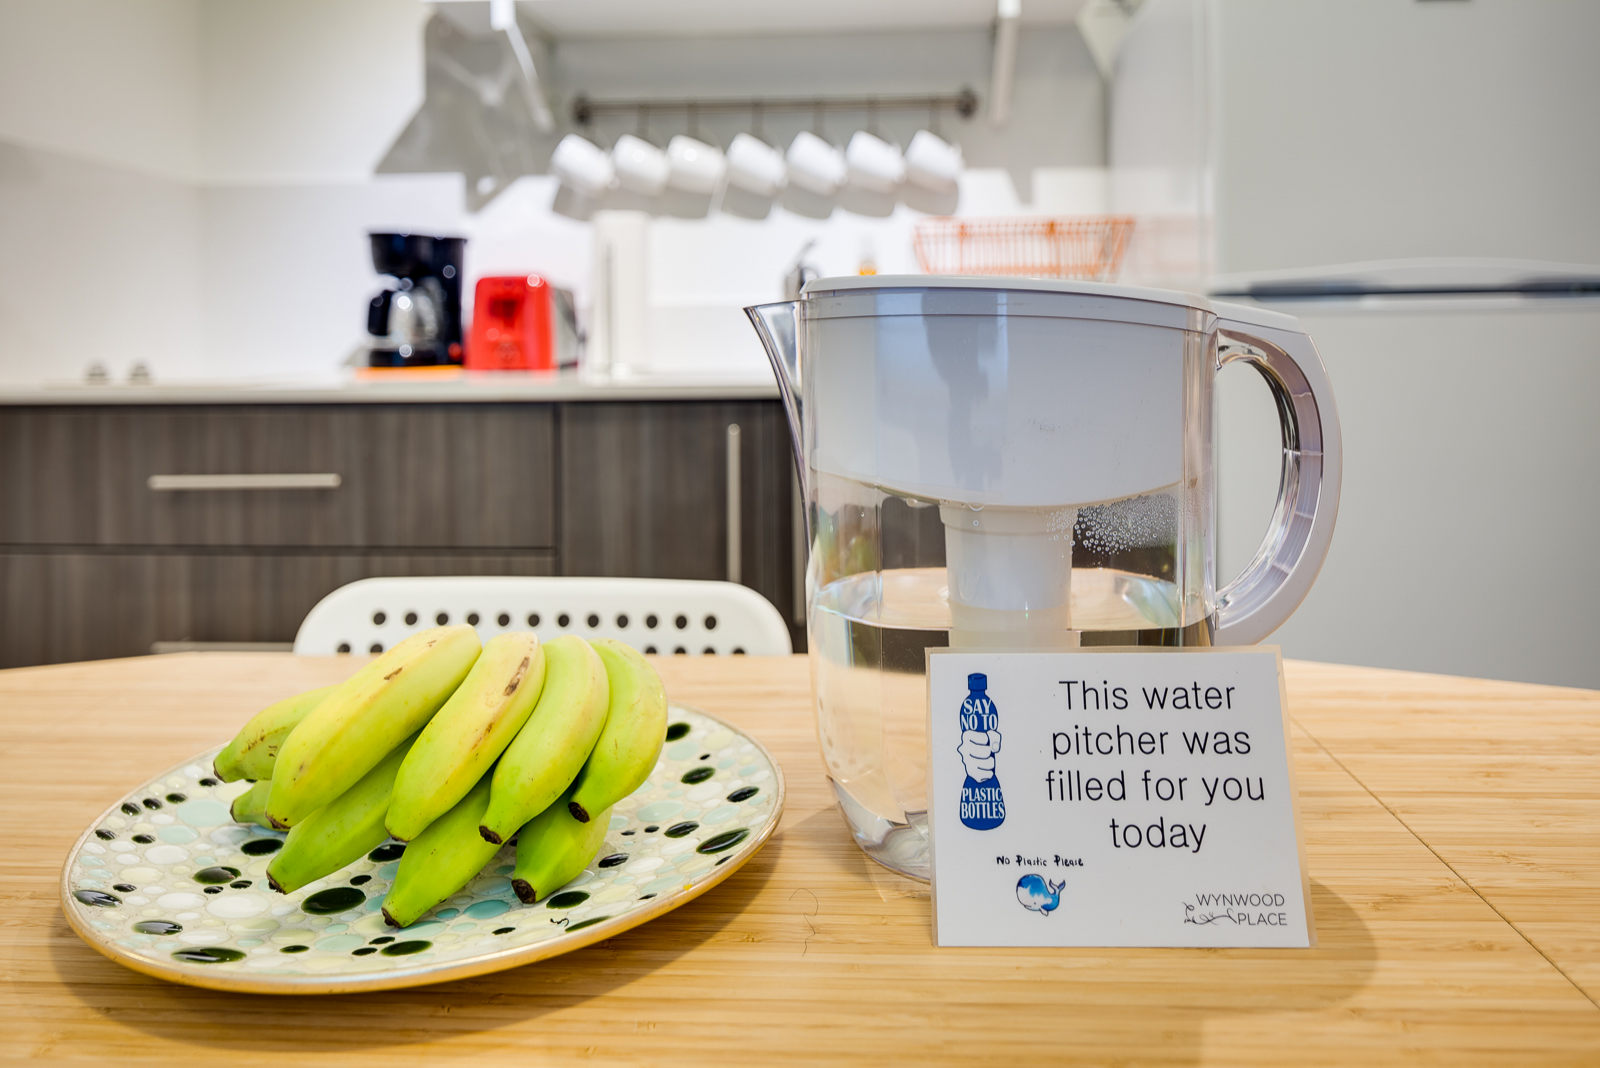 All our apartments come with a Britta water pitcher, we save on plastic bottle you always have drinking water!